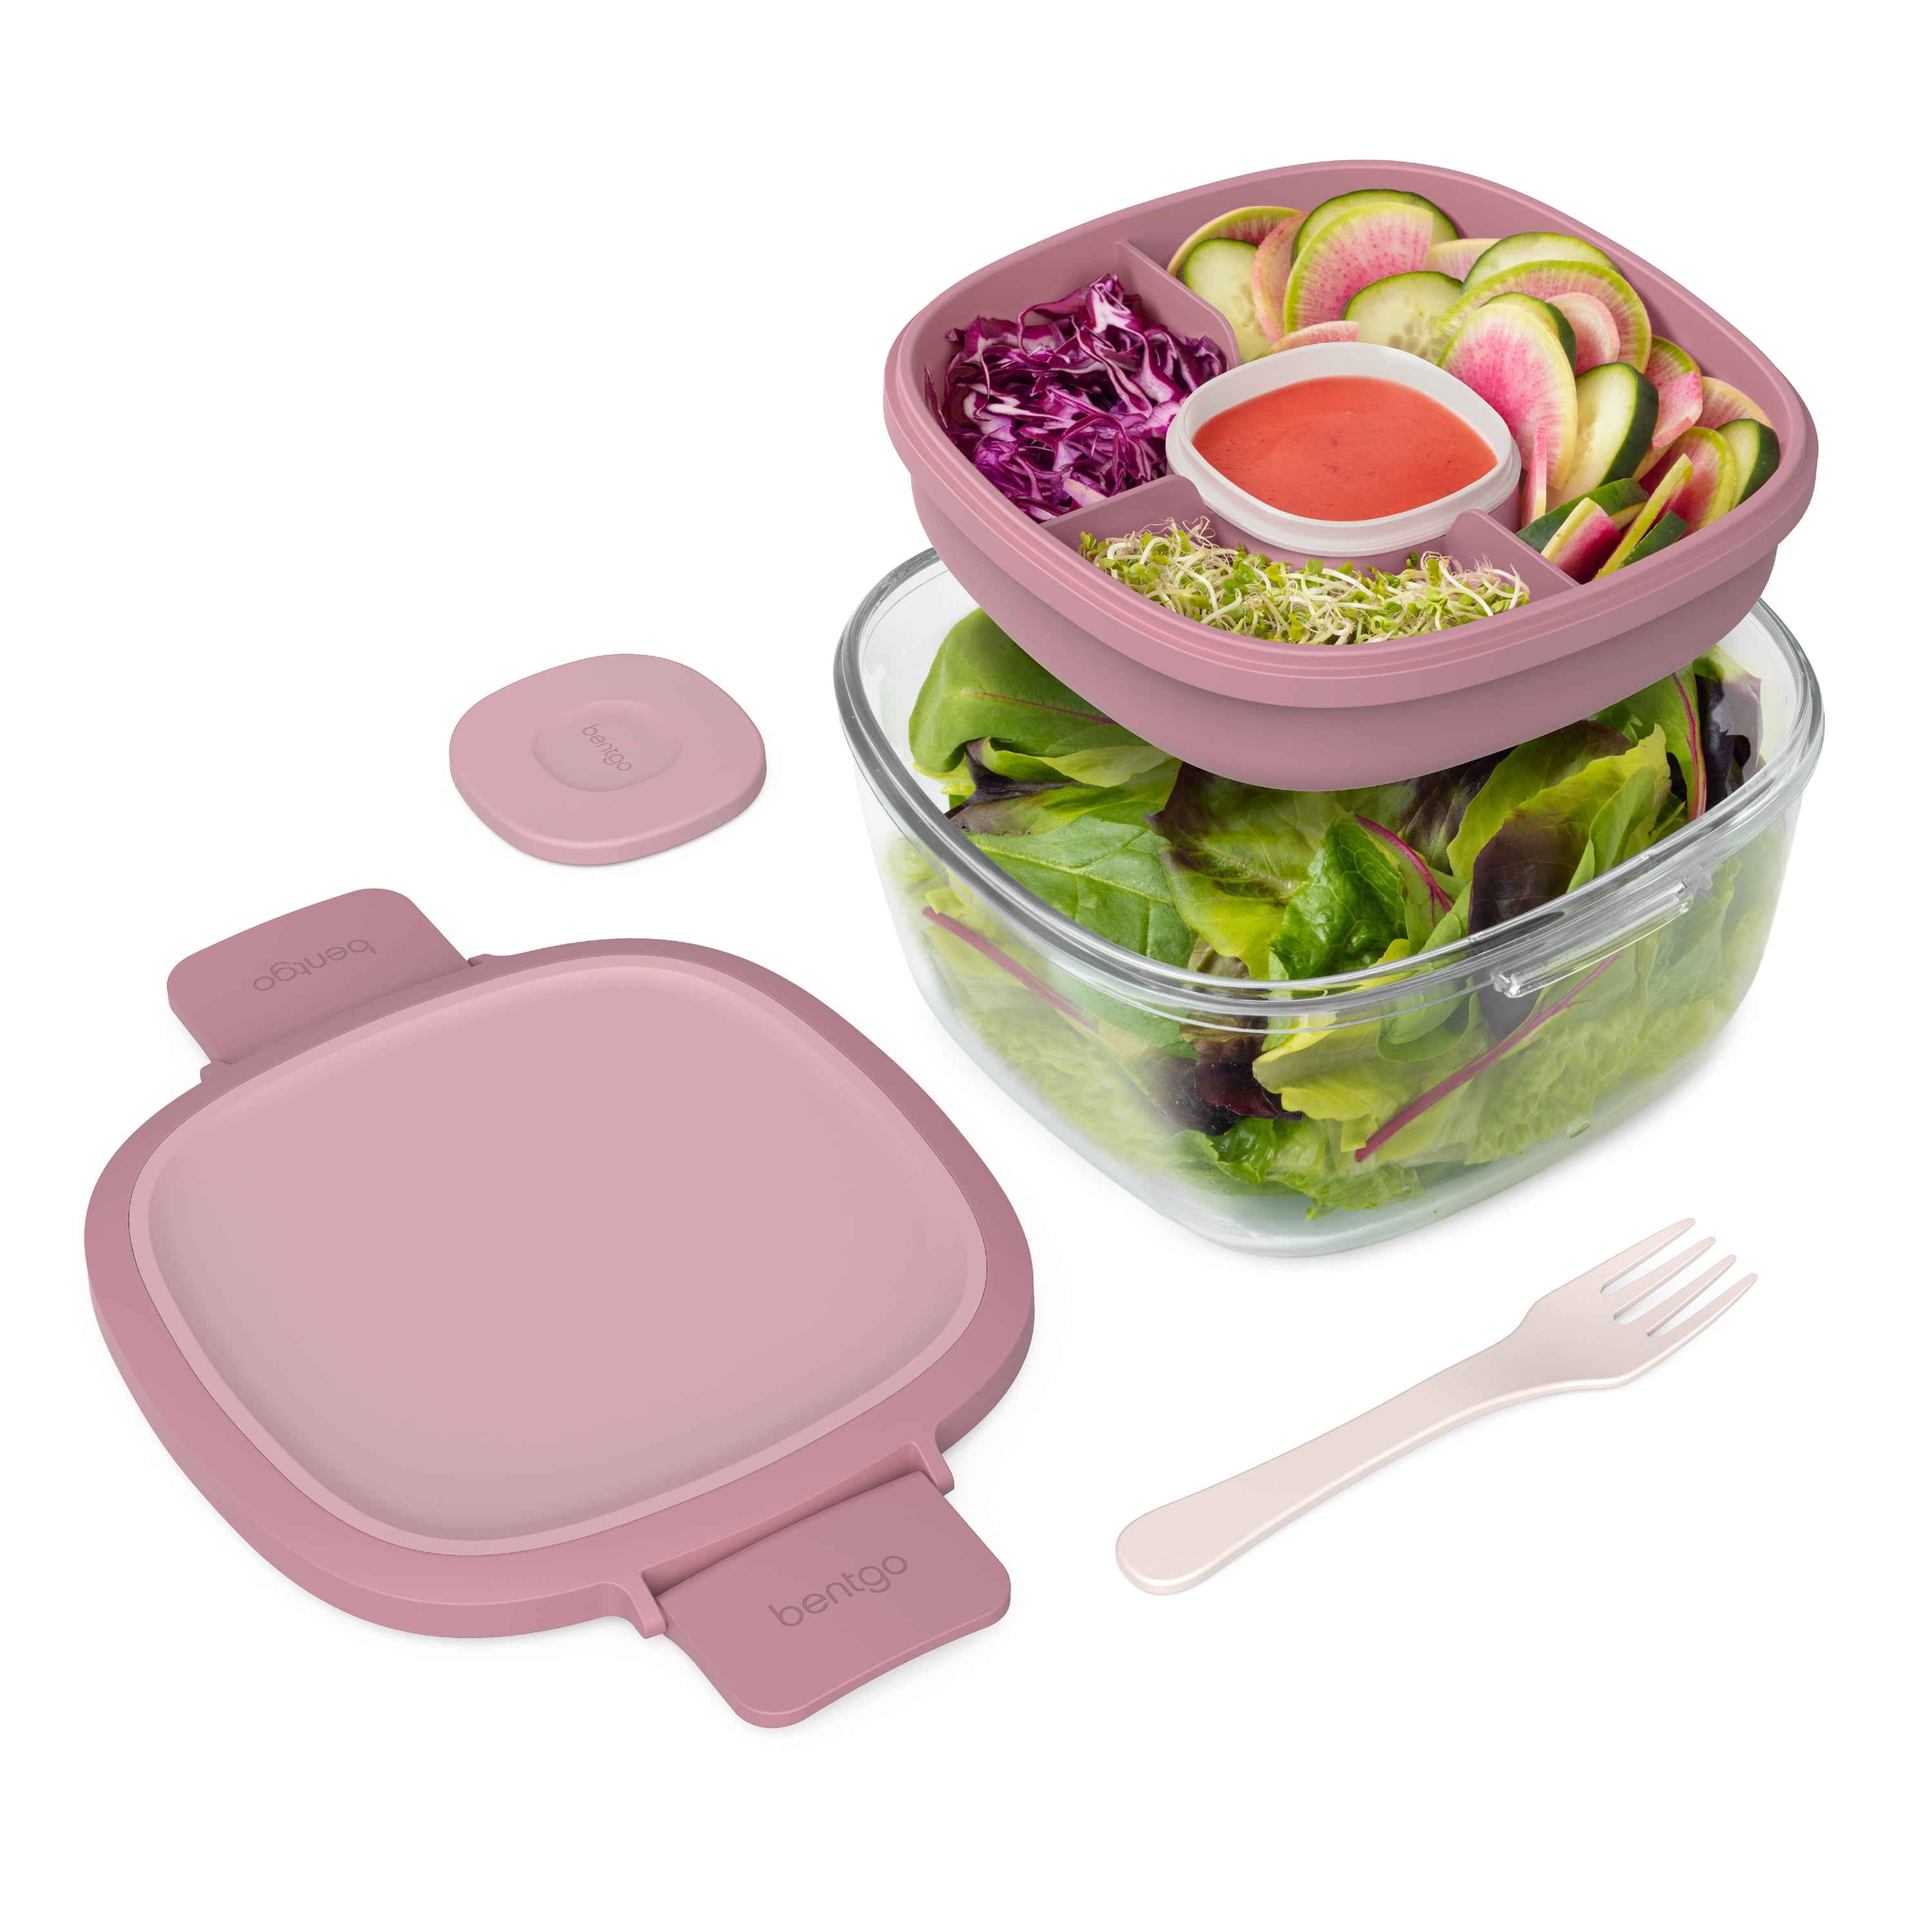 Translucent Lunch Sandwich Salad Containers for Adults Teens, Select Color